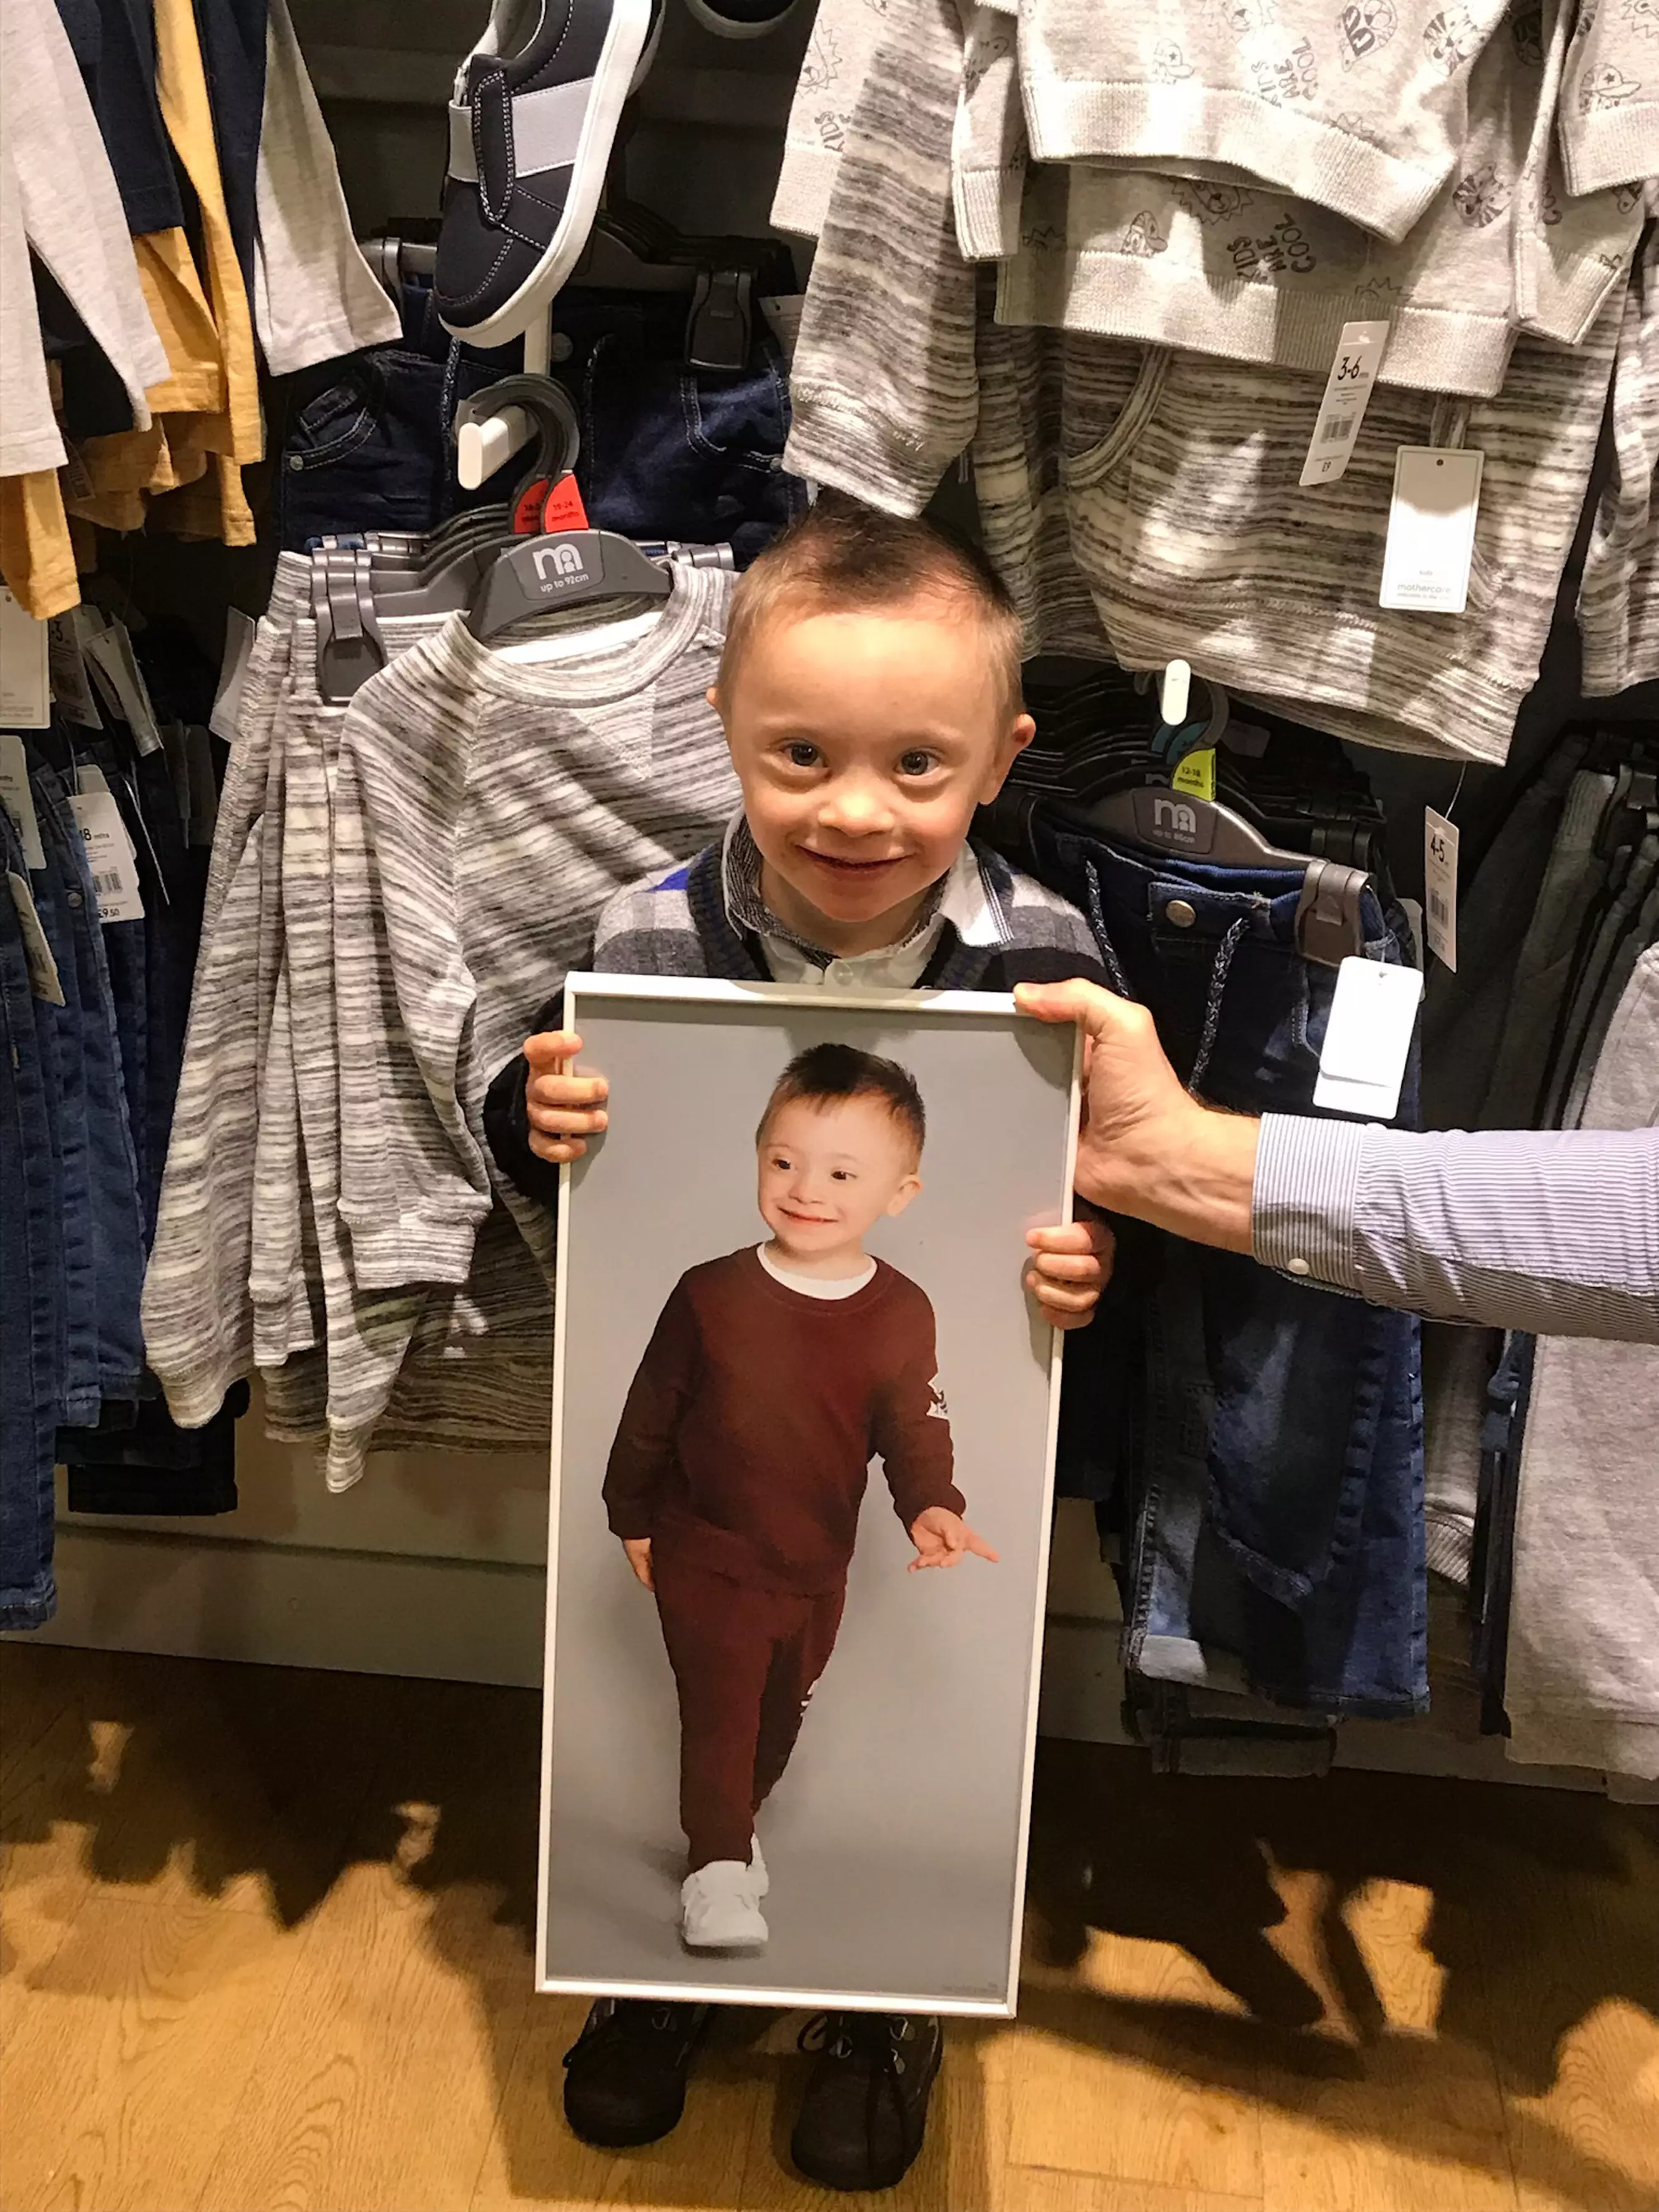 Riley proudly holding up his modelling image within a store .